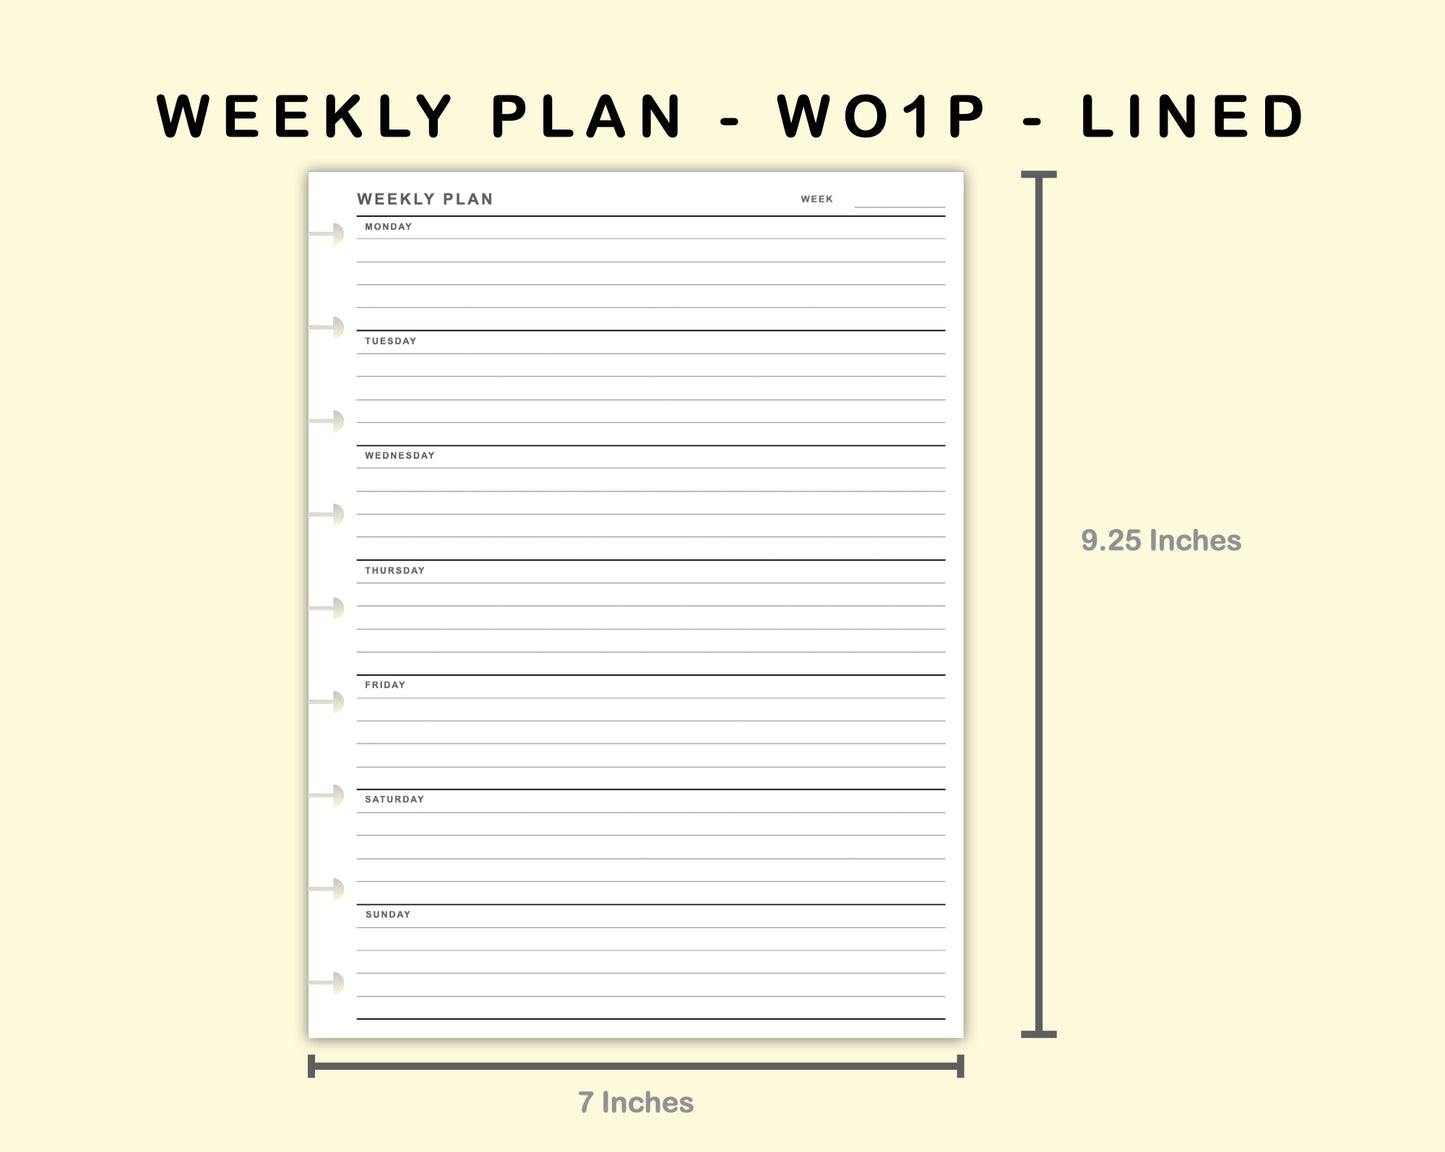 Classic HP Inserts - Weekly Plan - WO1P - Lined